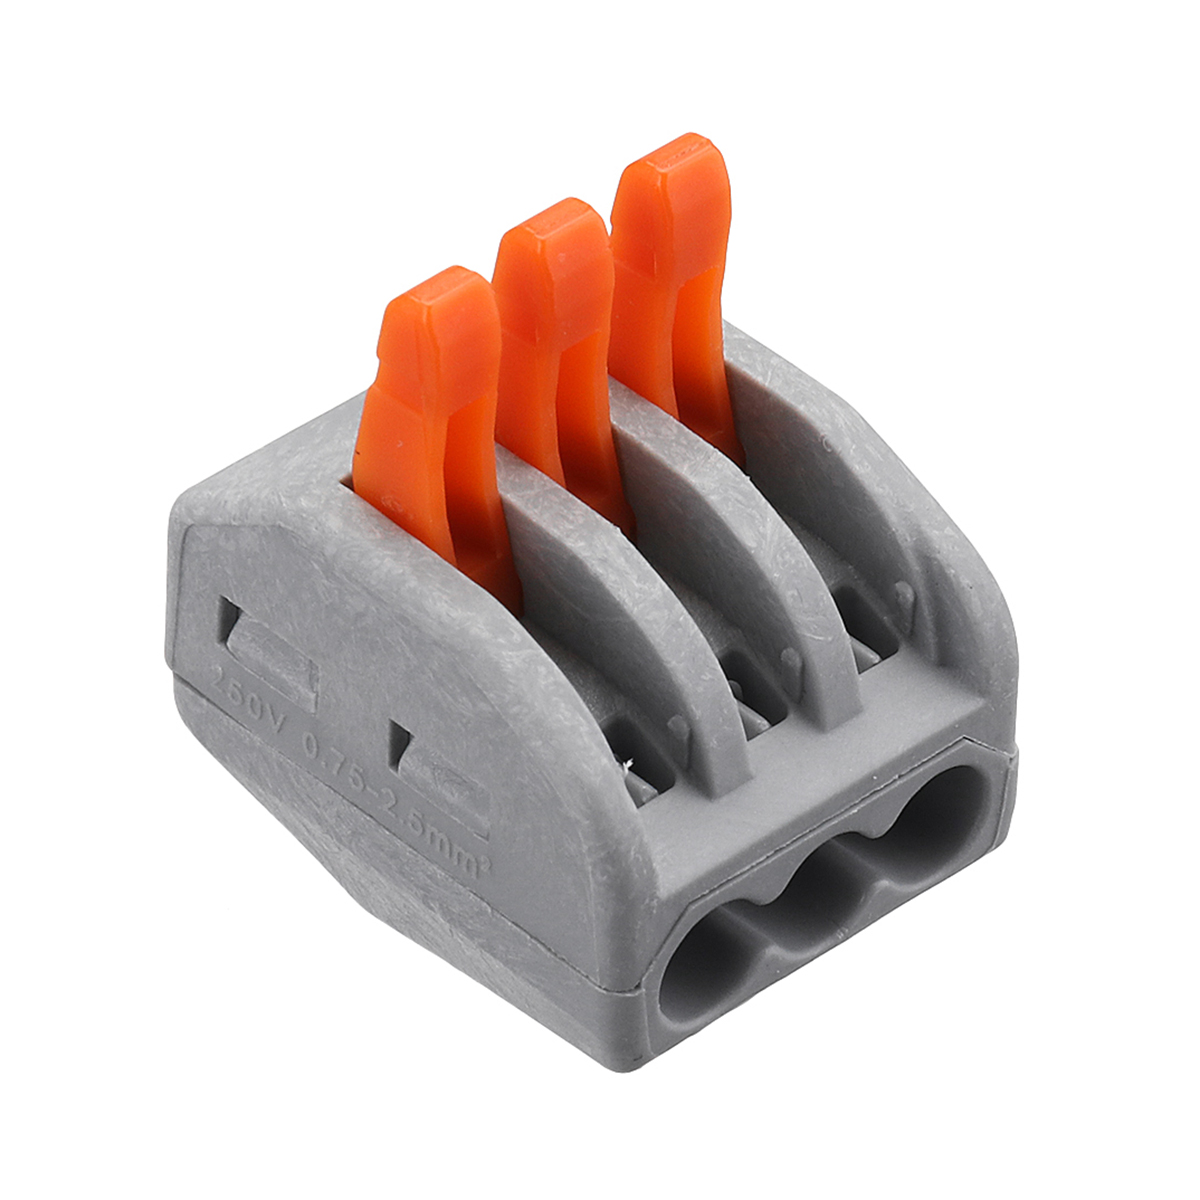 Excellwayreg-30Pcs-235-Holes-Spring-Conductor-Terminal-Block-Electric-Cable-Wire-Connector-1389031-7